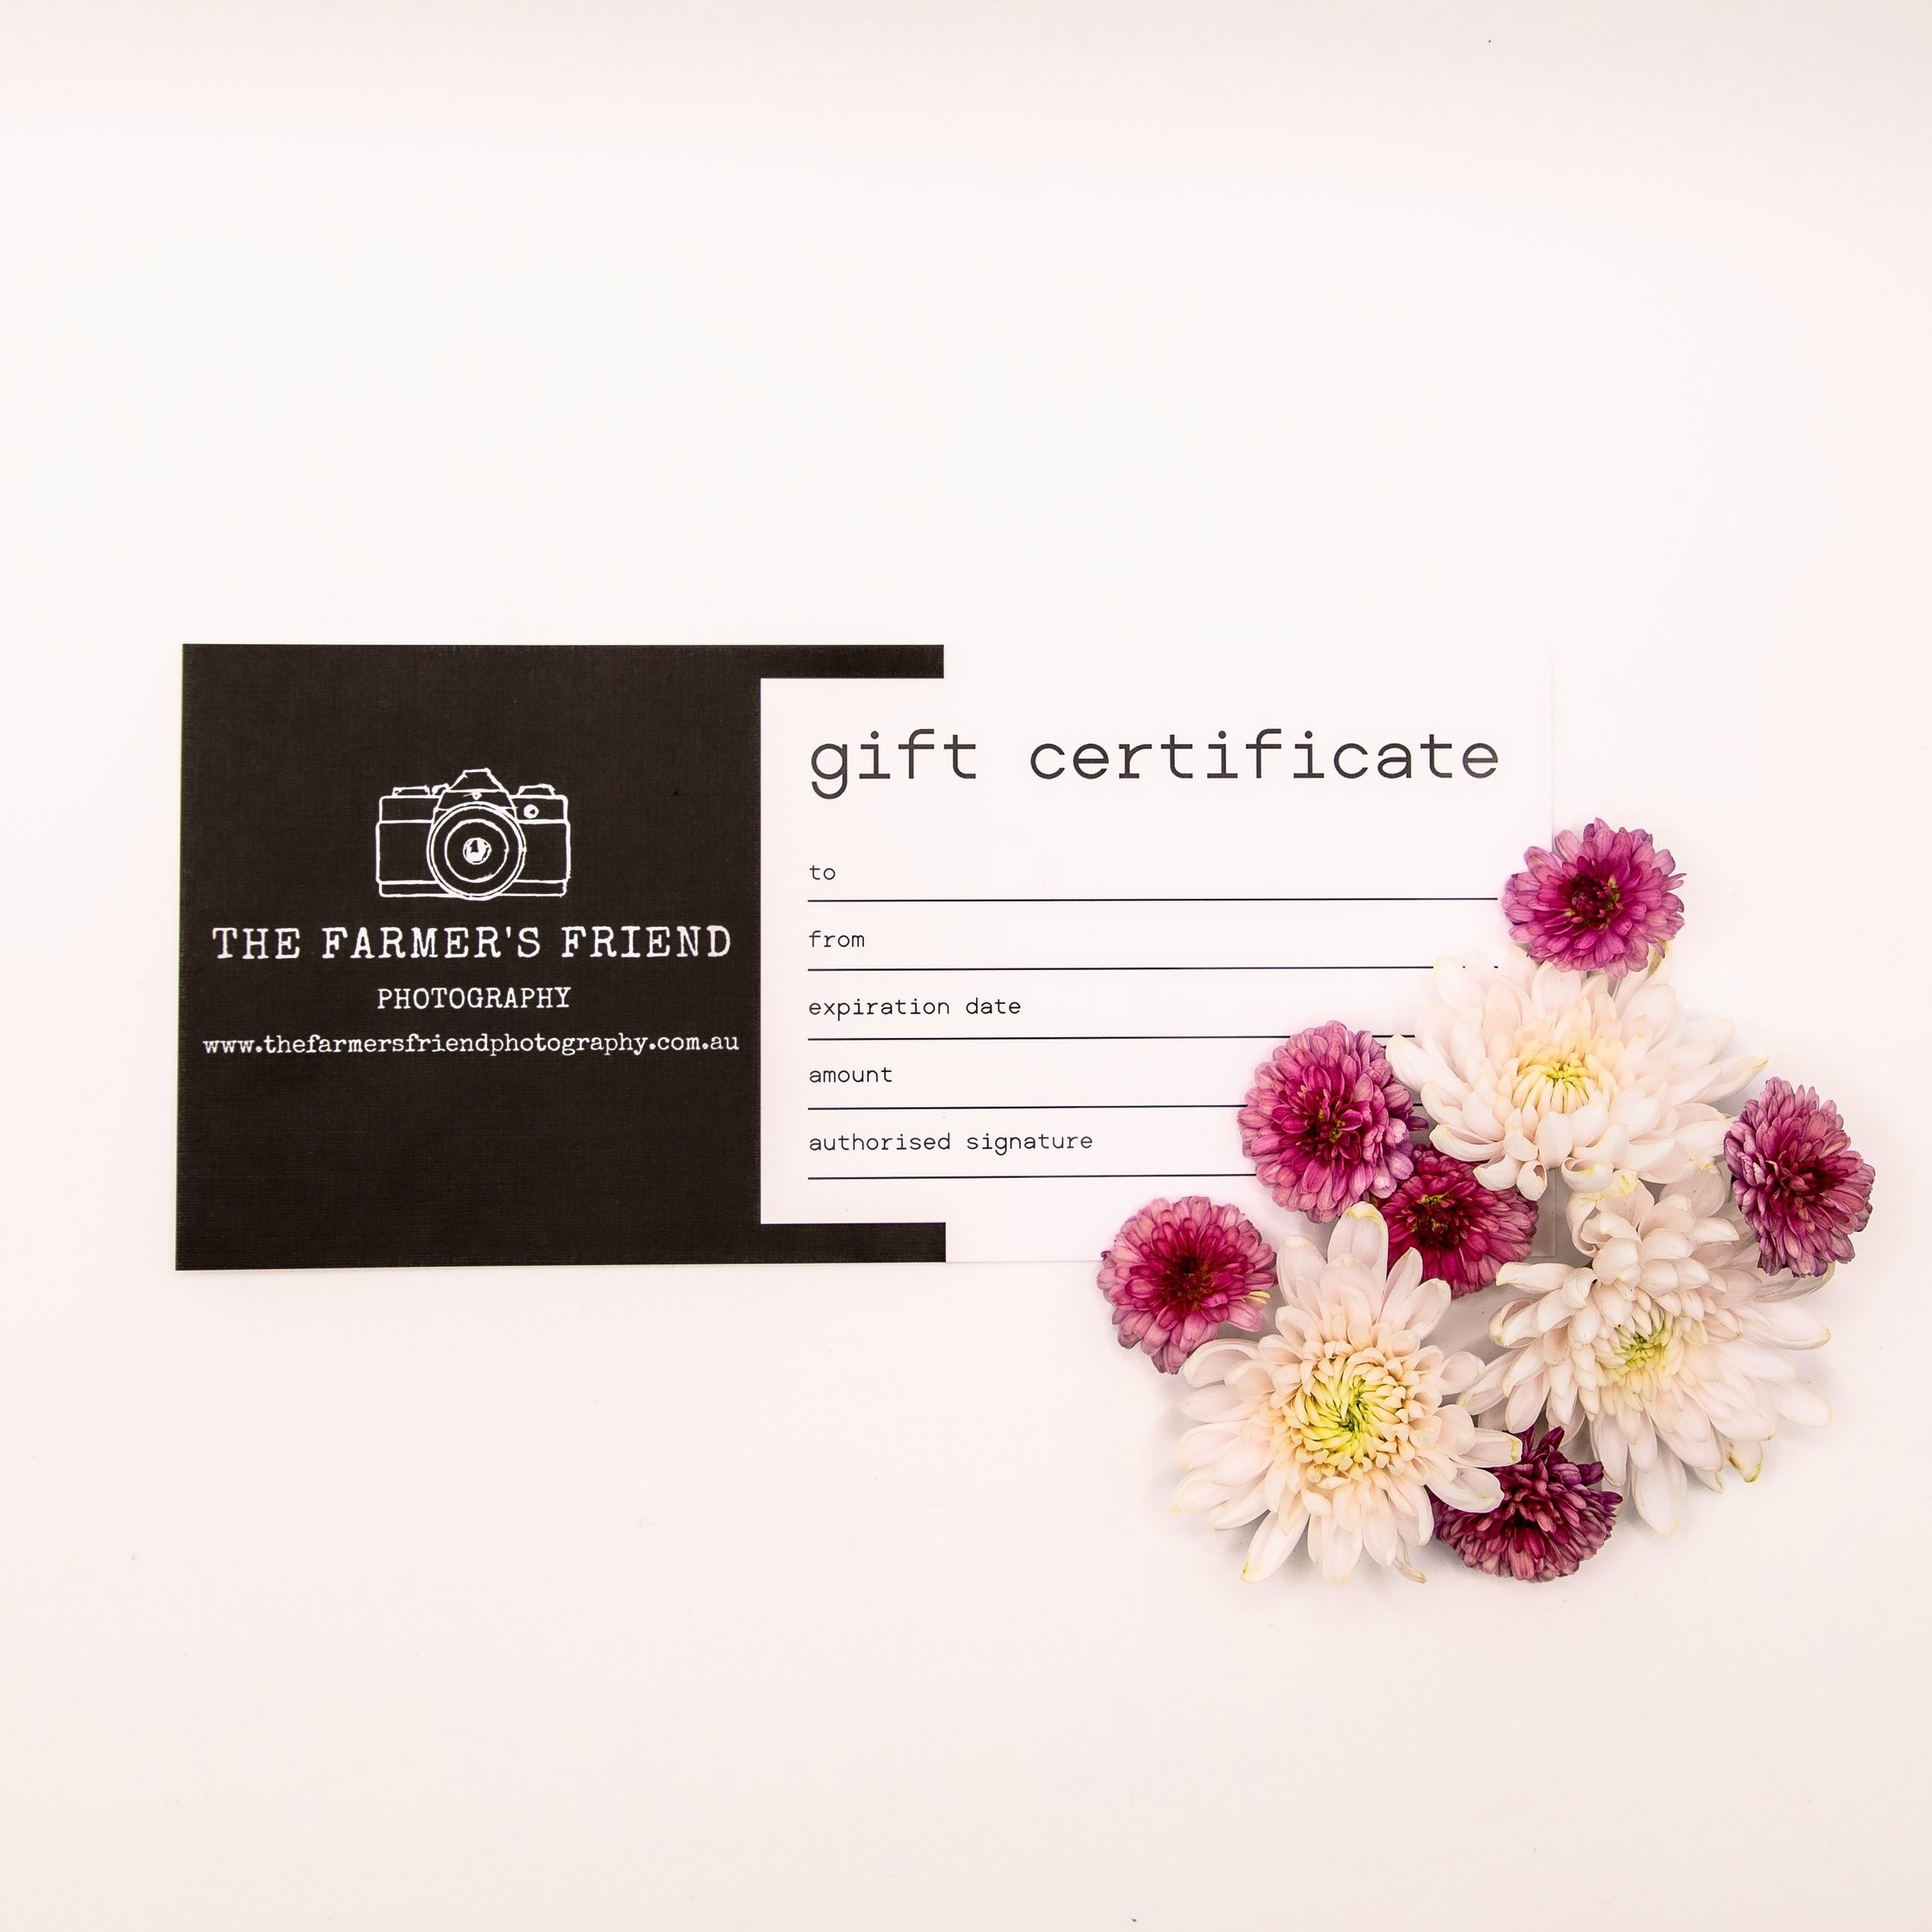 Did you know I do gift certificates? 

Perfect gift for Mother&rsquo;s Day (wink wink), or any other occasion for that matter!

#giftcertificate #giftcertificatesavailable #mothersdaygift #mothersdaygiftideas #mothersday2024 #thefarmersfriend #thefar